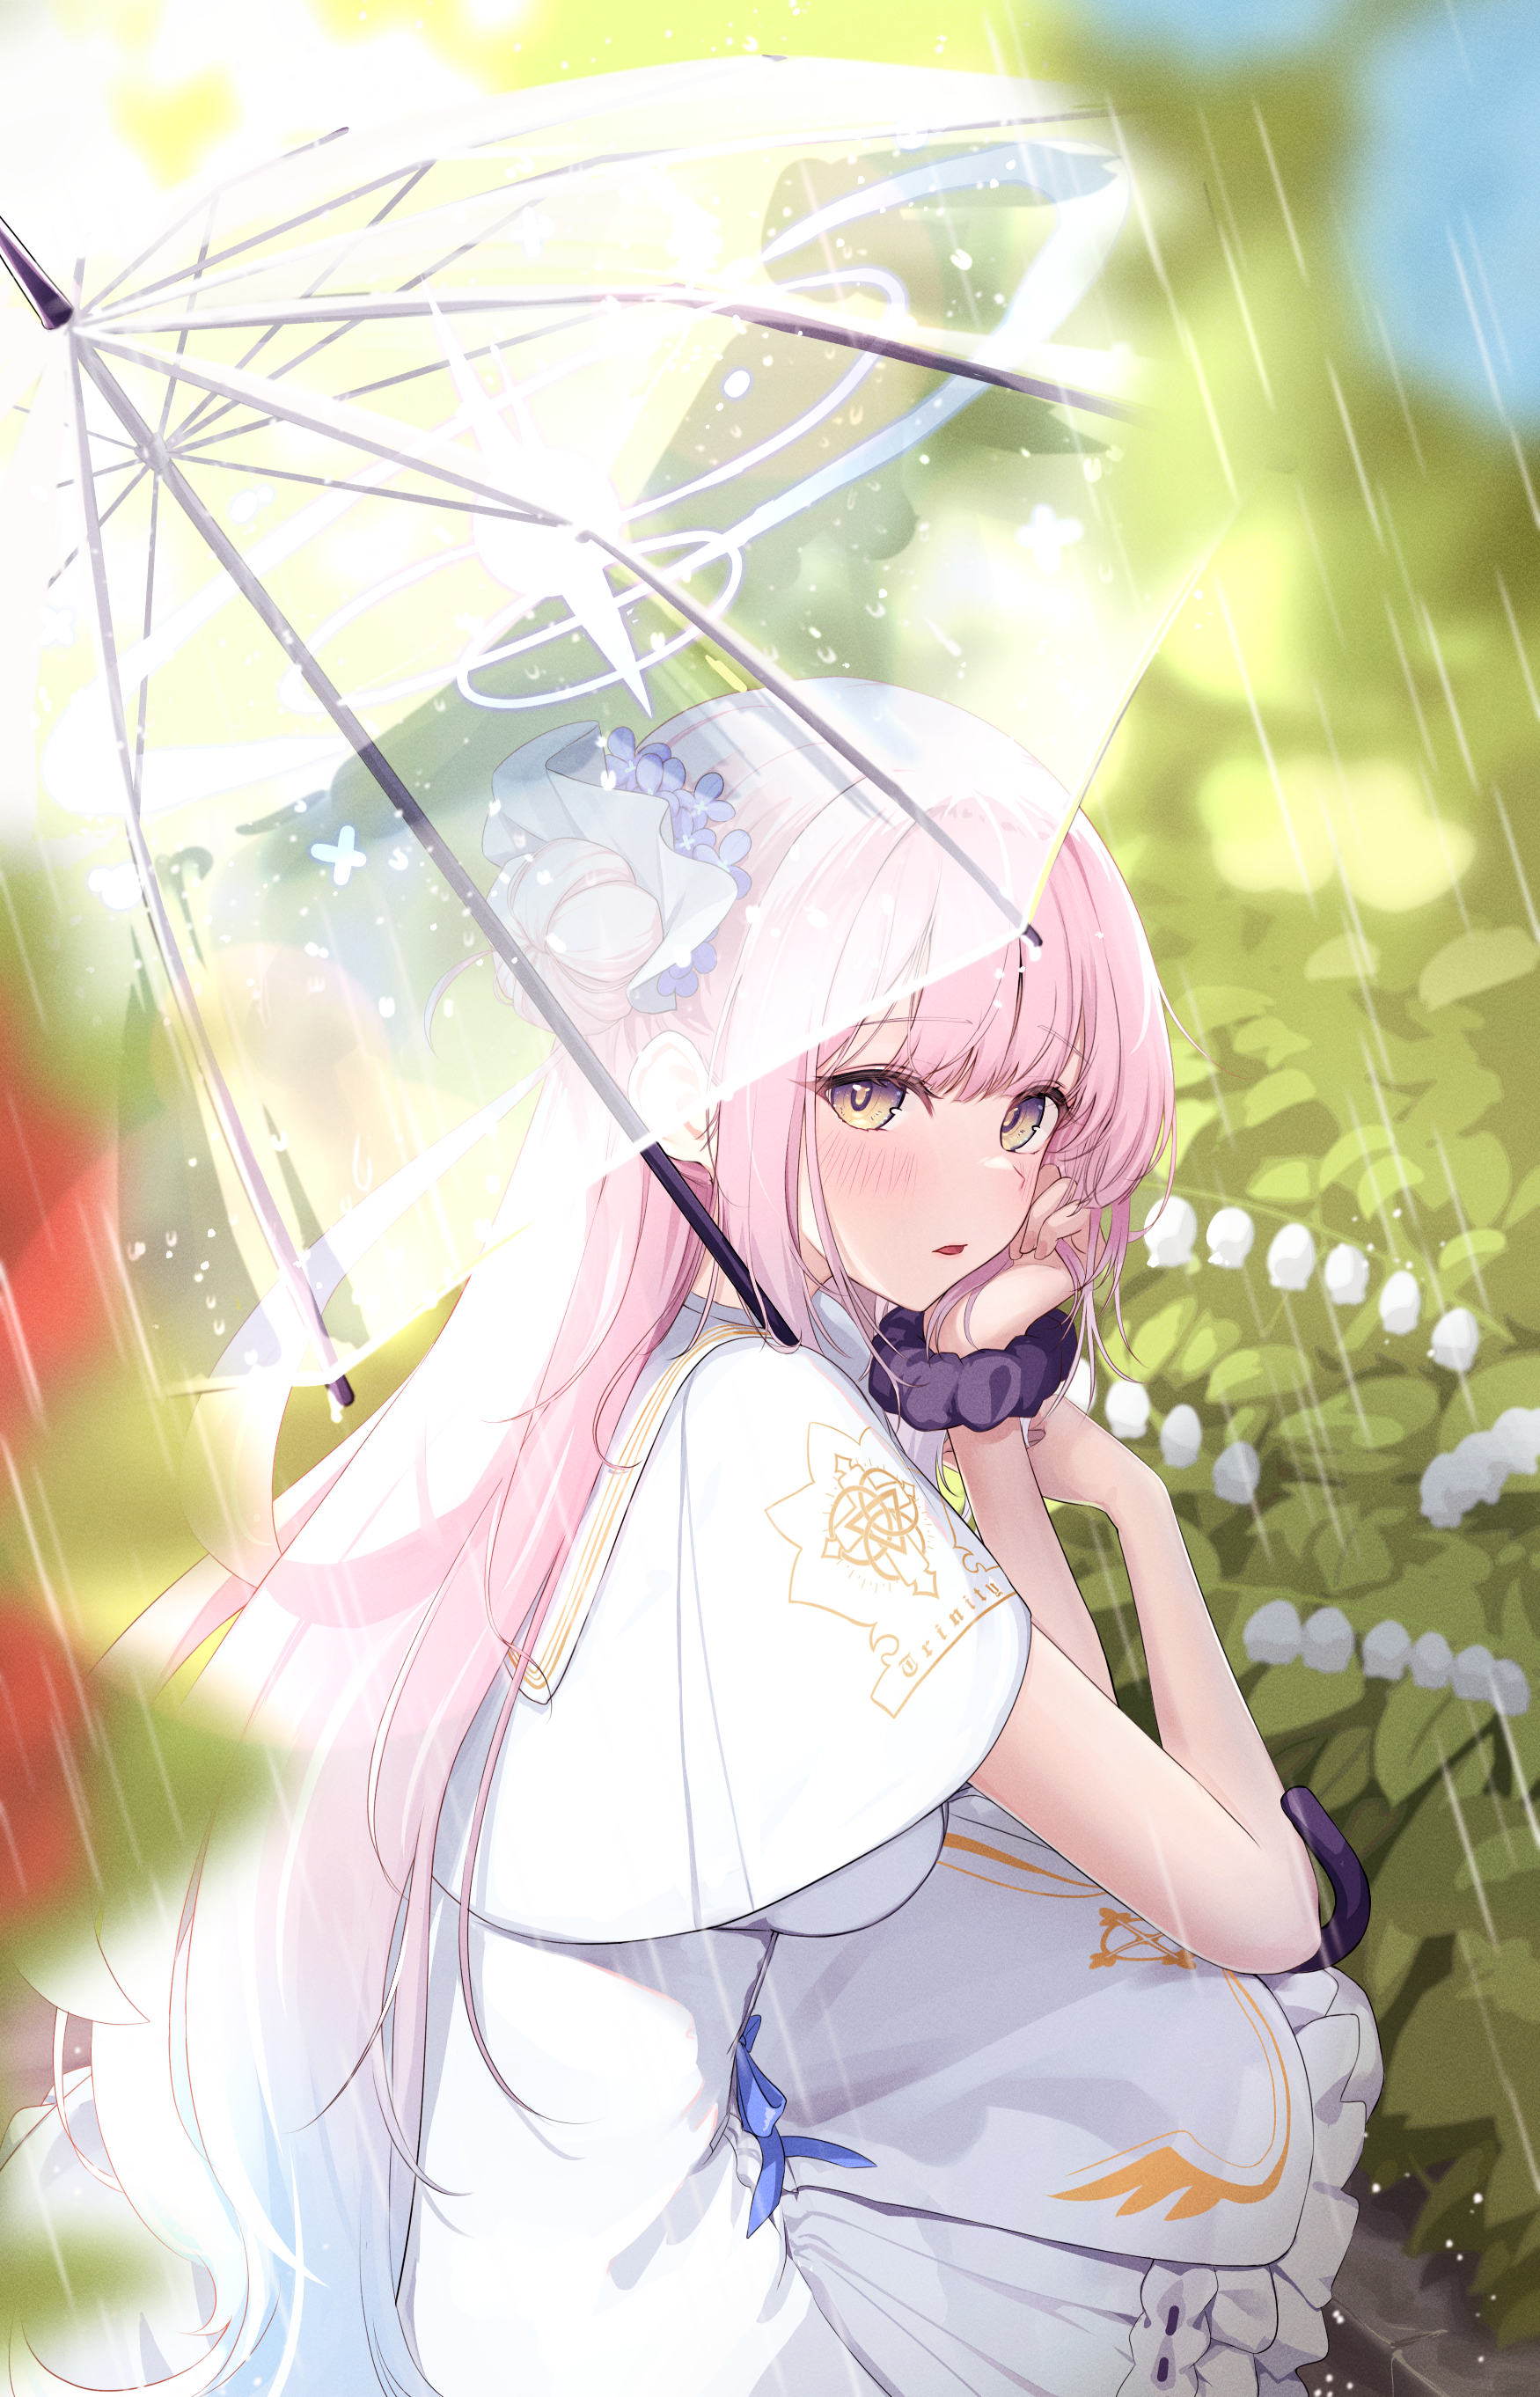 Anime 1750x2724 anime anime girls Pixiv Misono Mika Blue Archive squatting leaves hand on face blurred blurry background rain umbrella dress looking at viewer long hair pink hair yellow eyes portrait display sunlight digital art